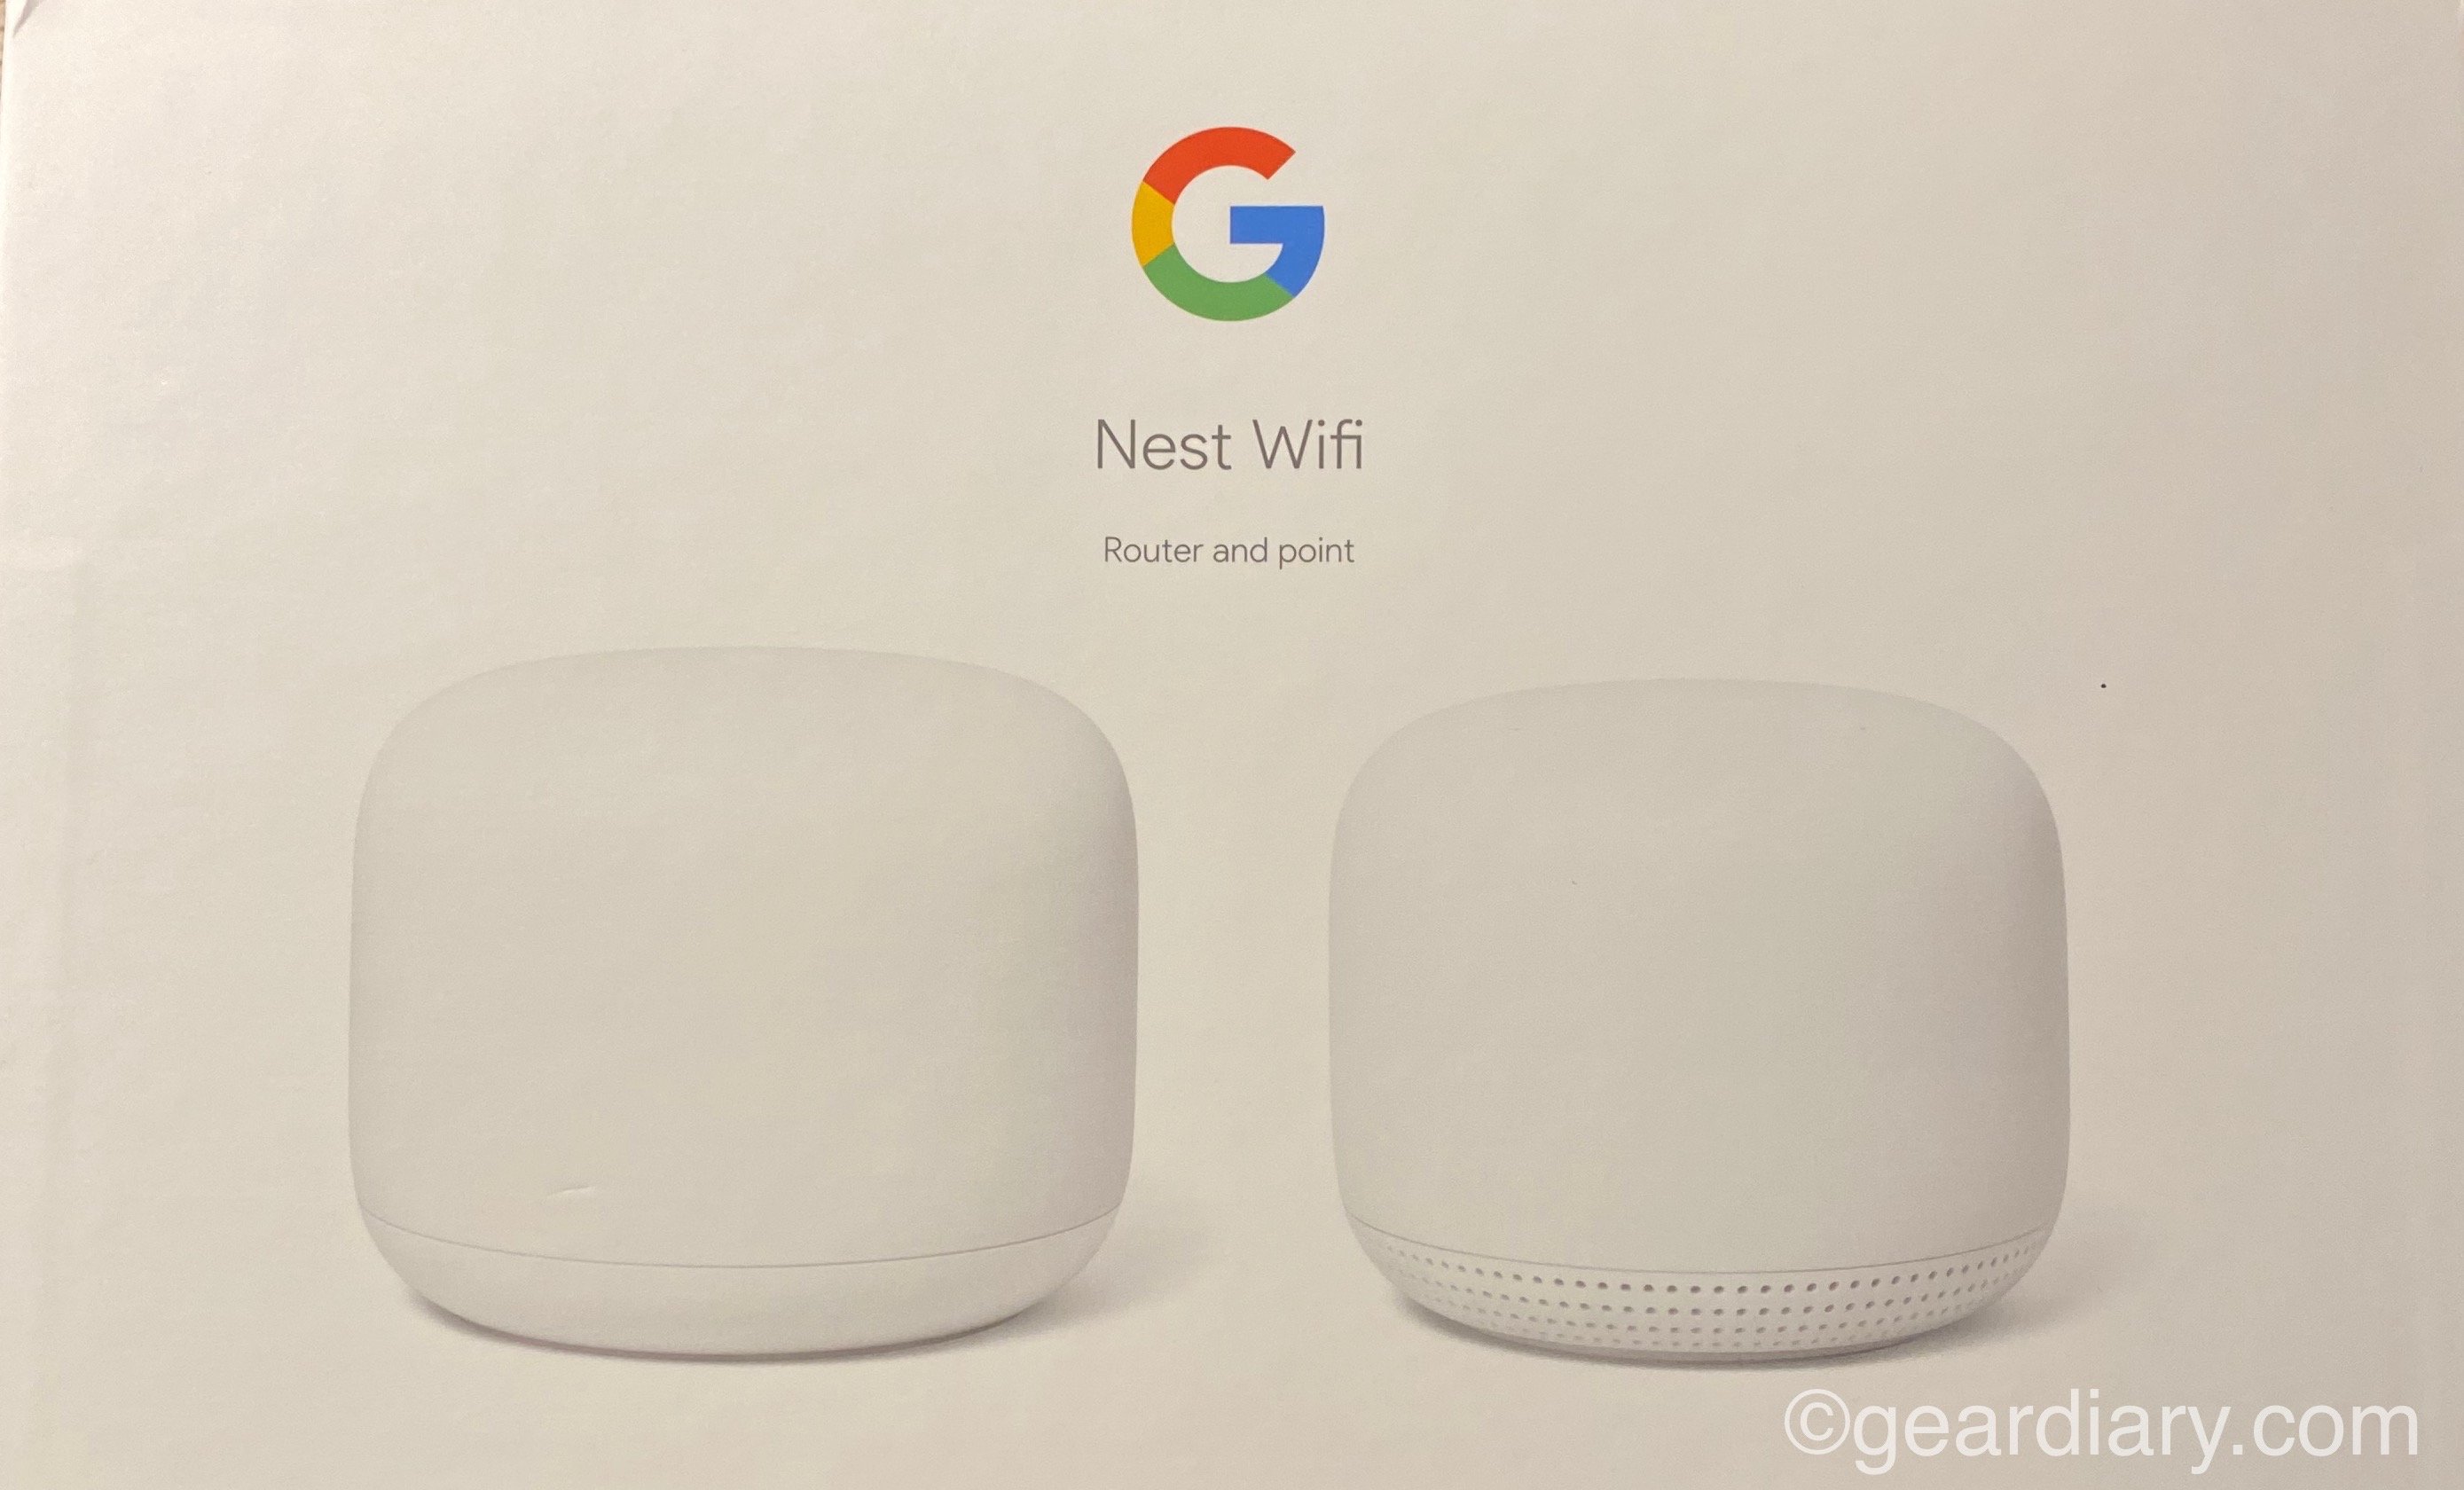 The New Nest Wifi From Google Is Wifi For The 2019 Smart Home